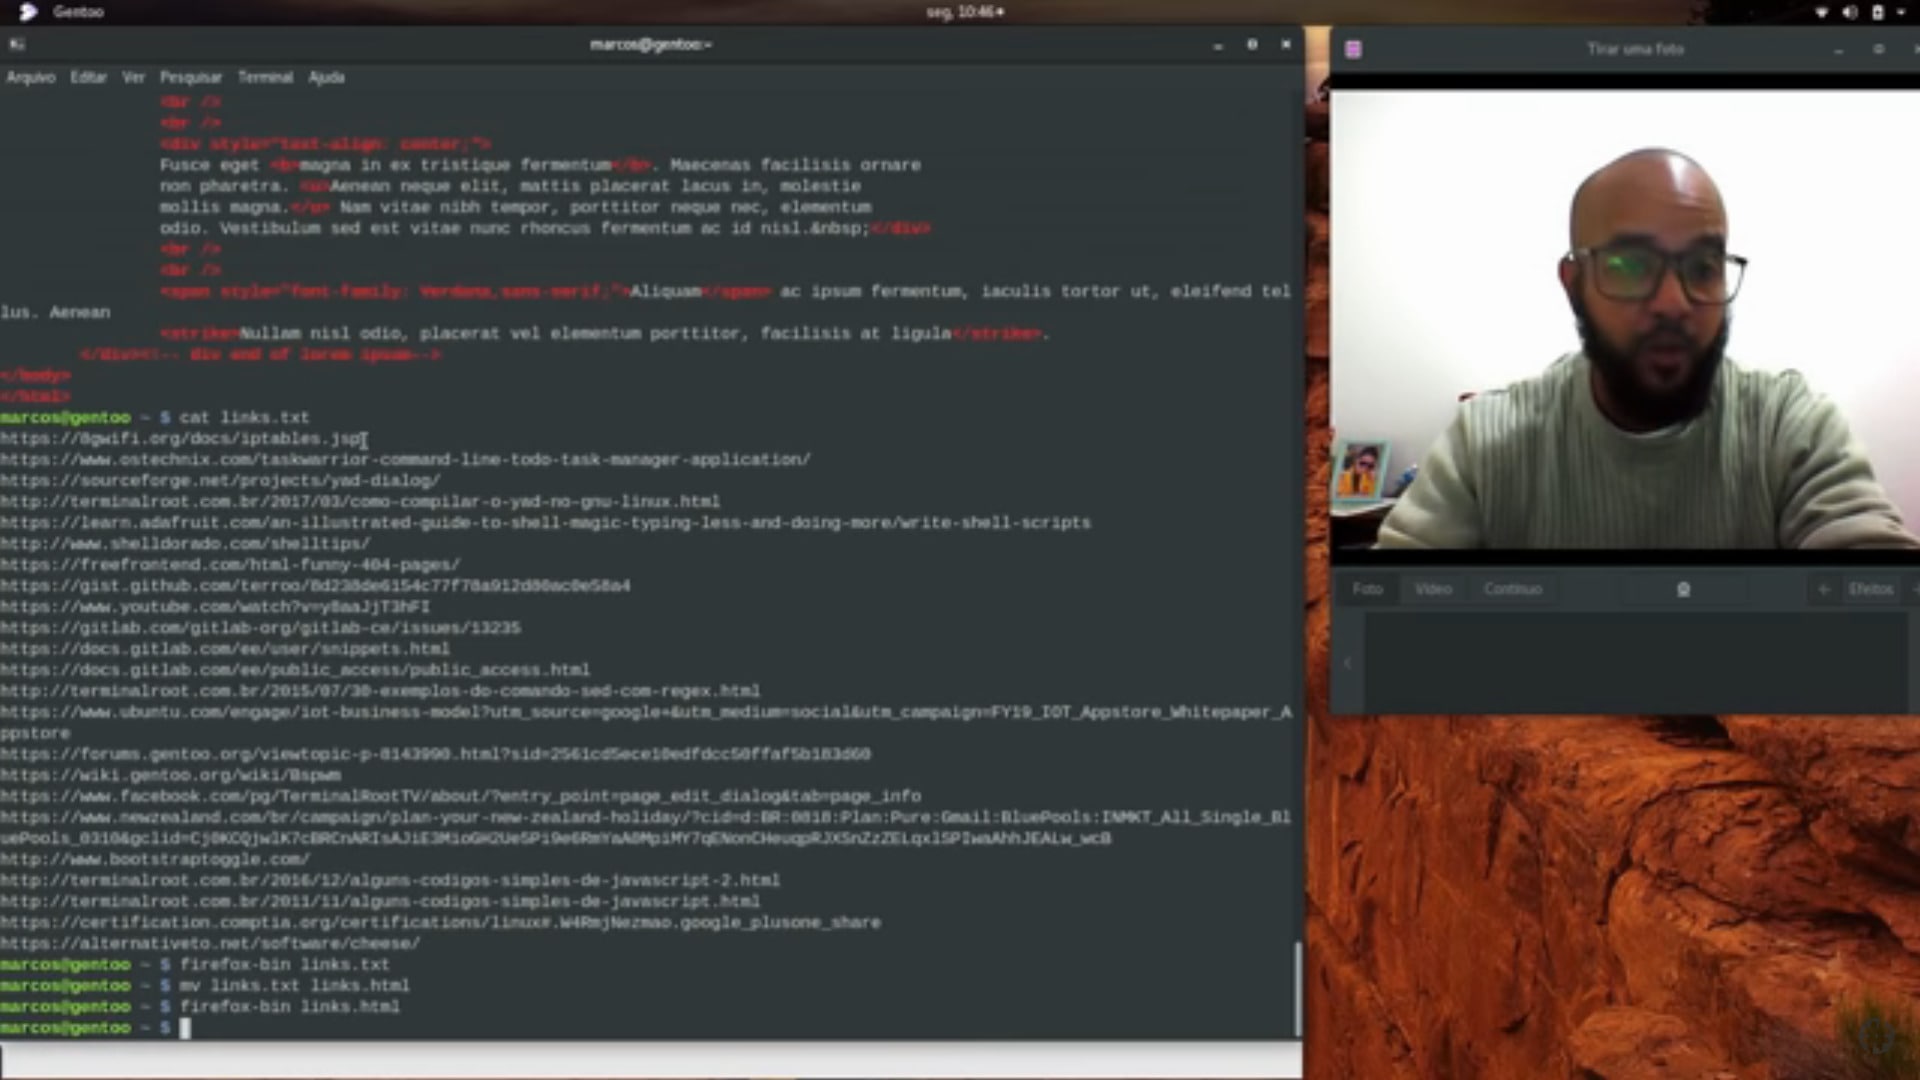 How to Enable Webcam Drive and Install Cheese on Gentoo